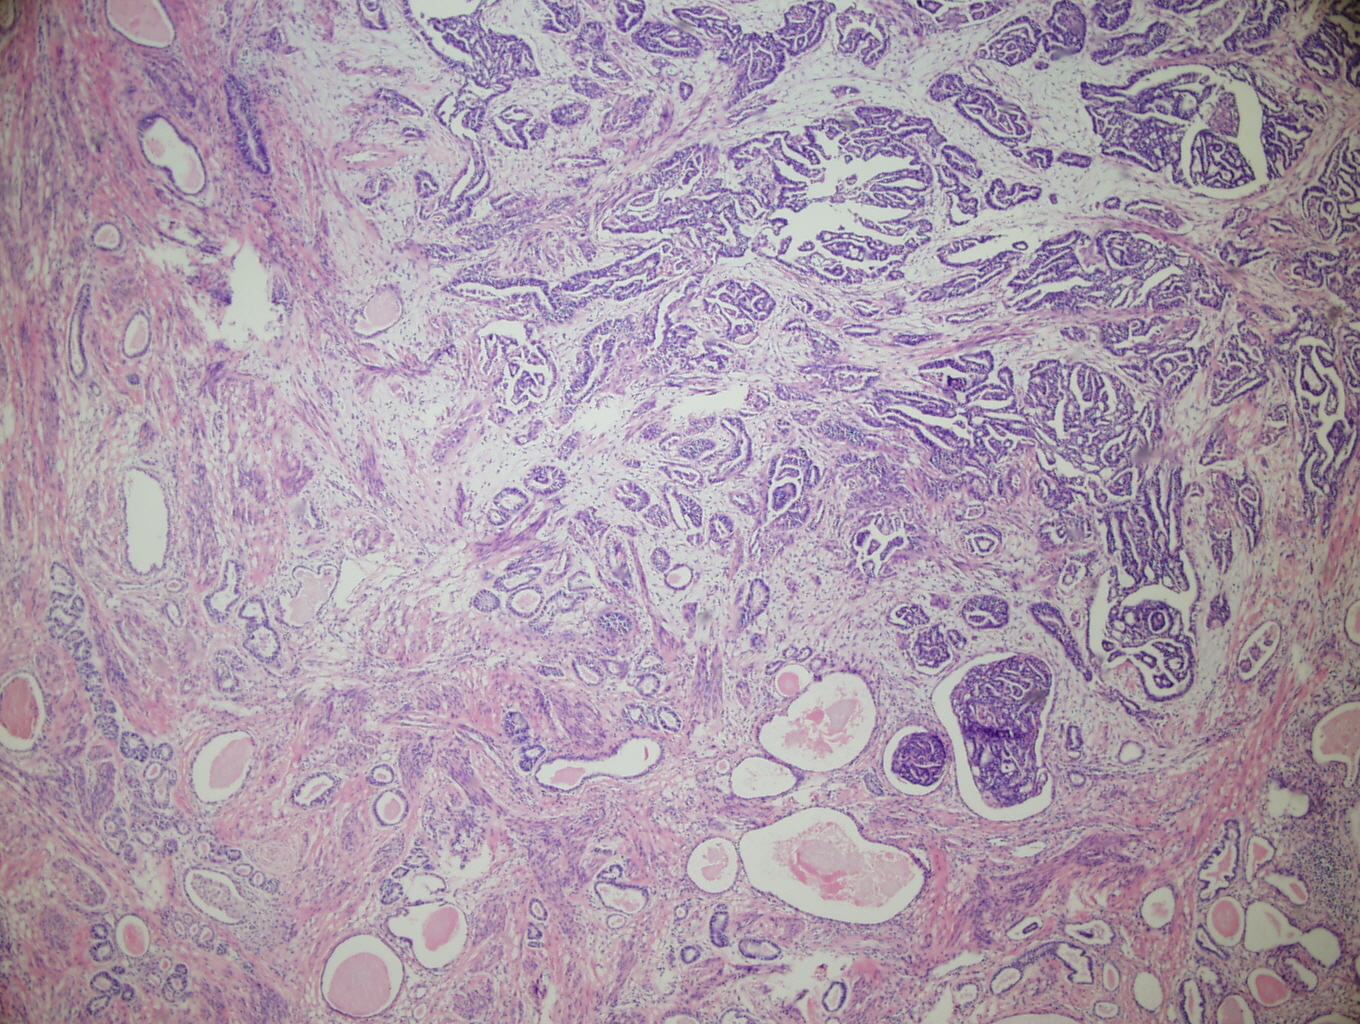 Figure 2: Low power (4X) view of tumor from lower uterine segment and cervix. A focus of irregular angular glands (some with papillary projections) is present adjacent to a varied proliferation of small and cystic dilated tubules (many of which have dense eosinophillic intraluminal secretions).